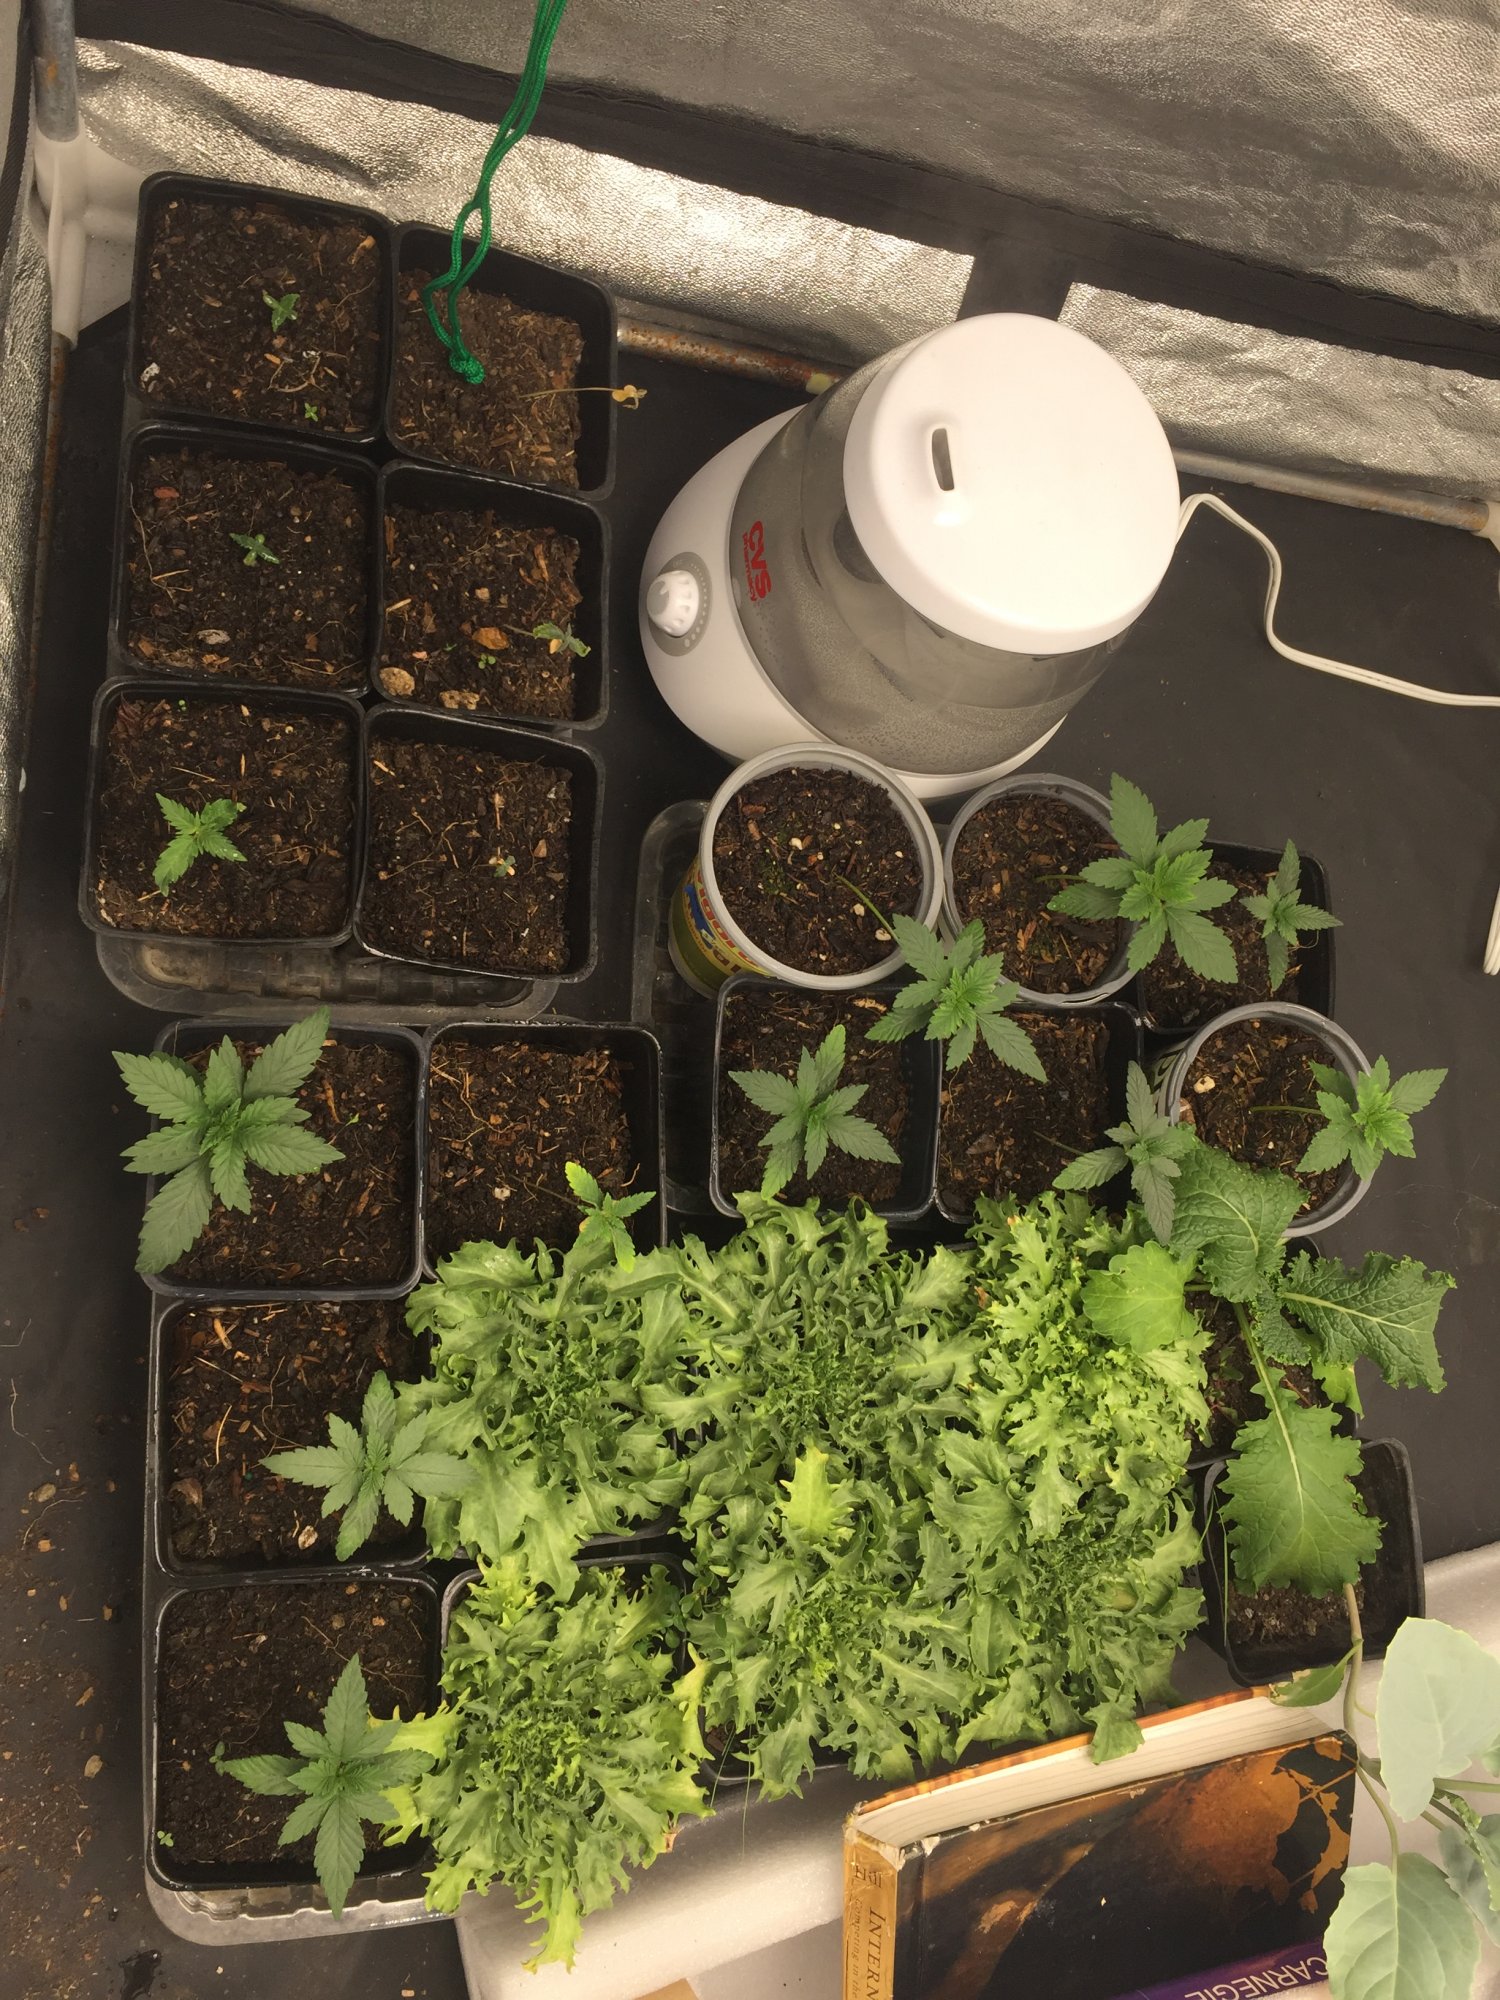 Some seedlings yellowing and or drooping